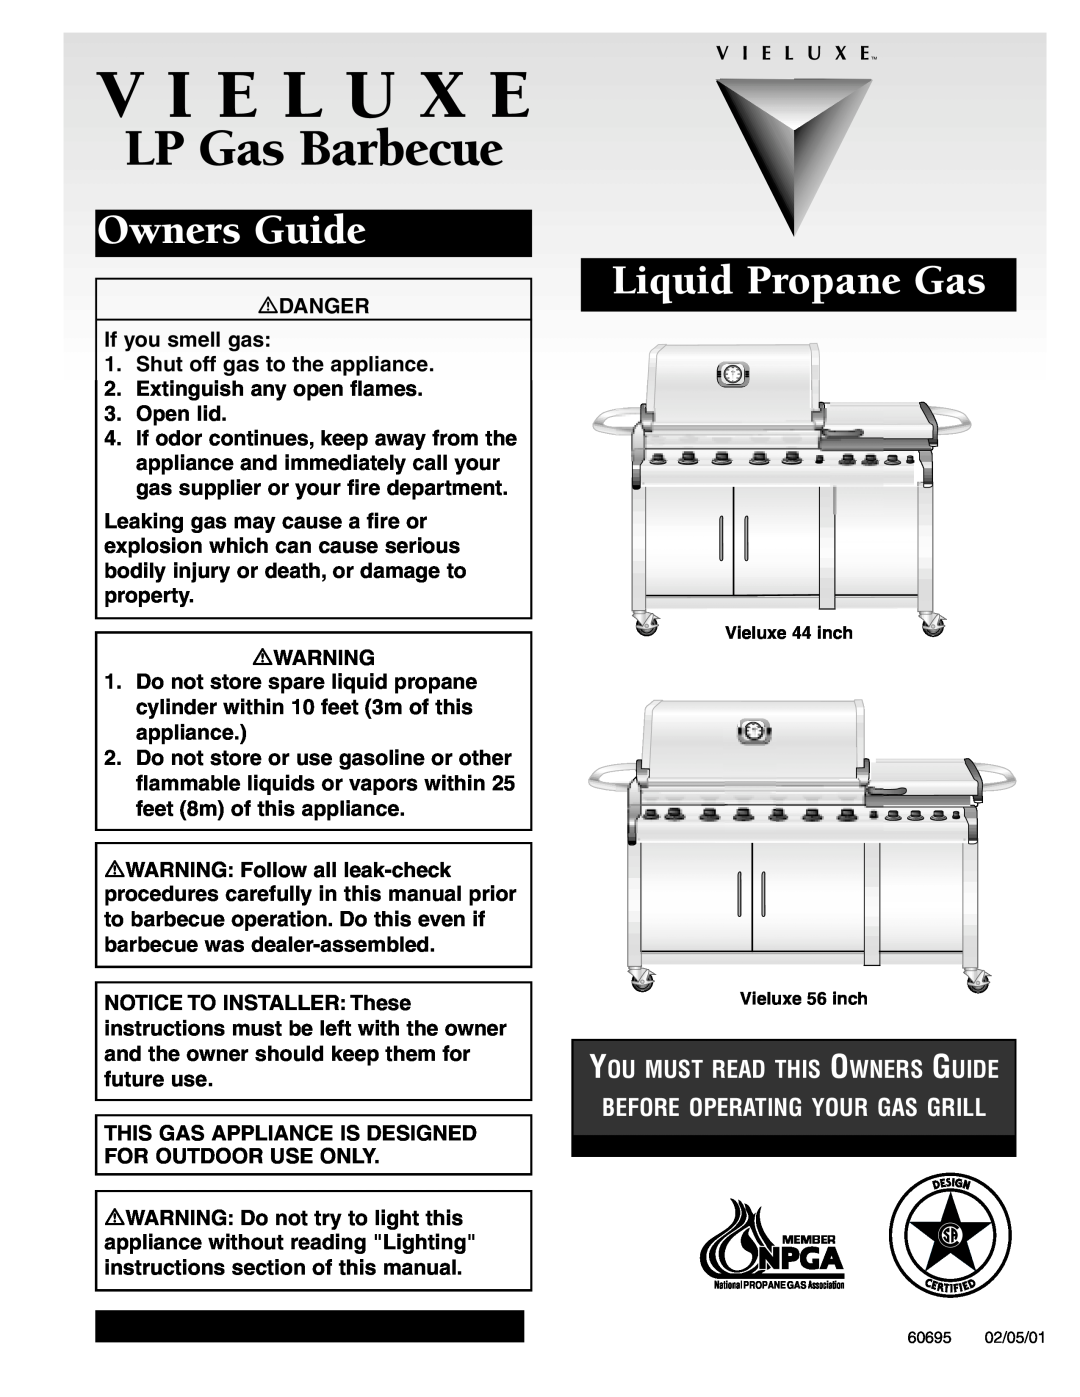 Weber Gas Burner manual V I E L U X E, LP Gas Barbecue, Liquid Propane Gas, You Must Read This Owners Guide 